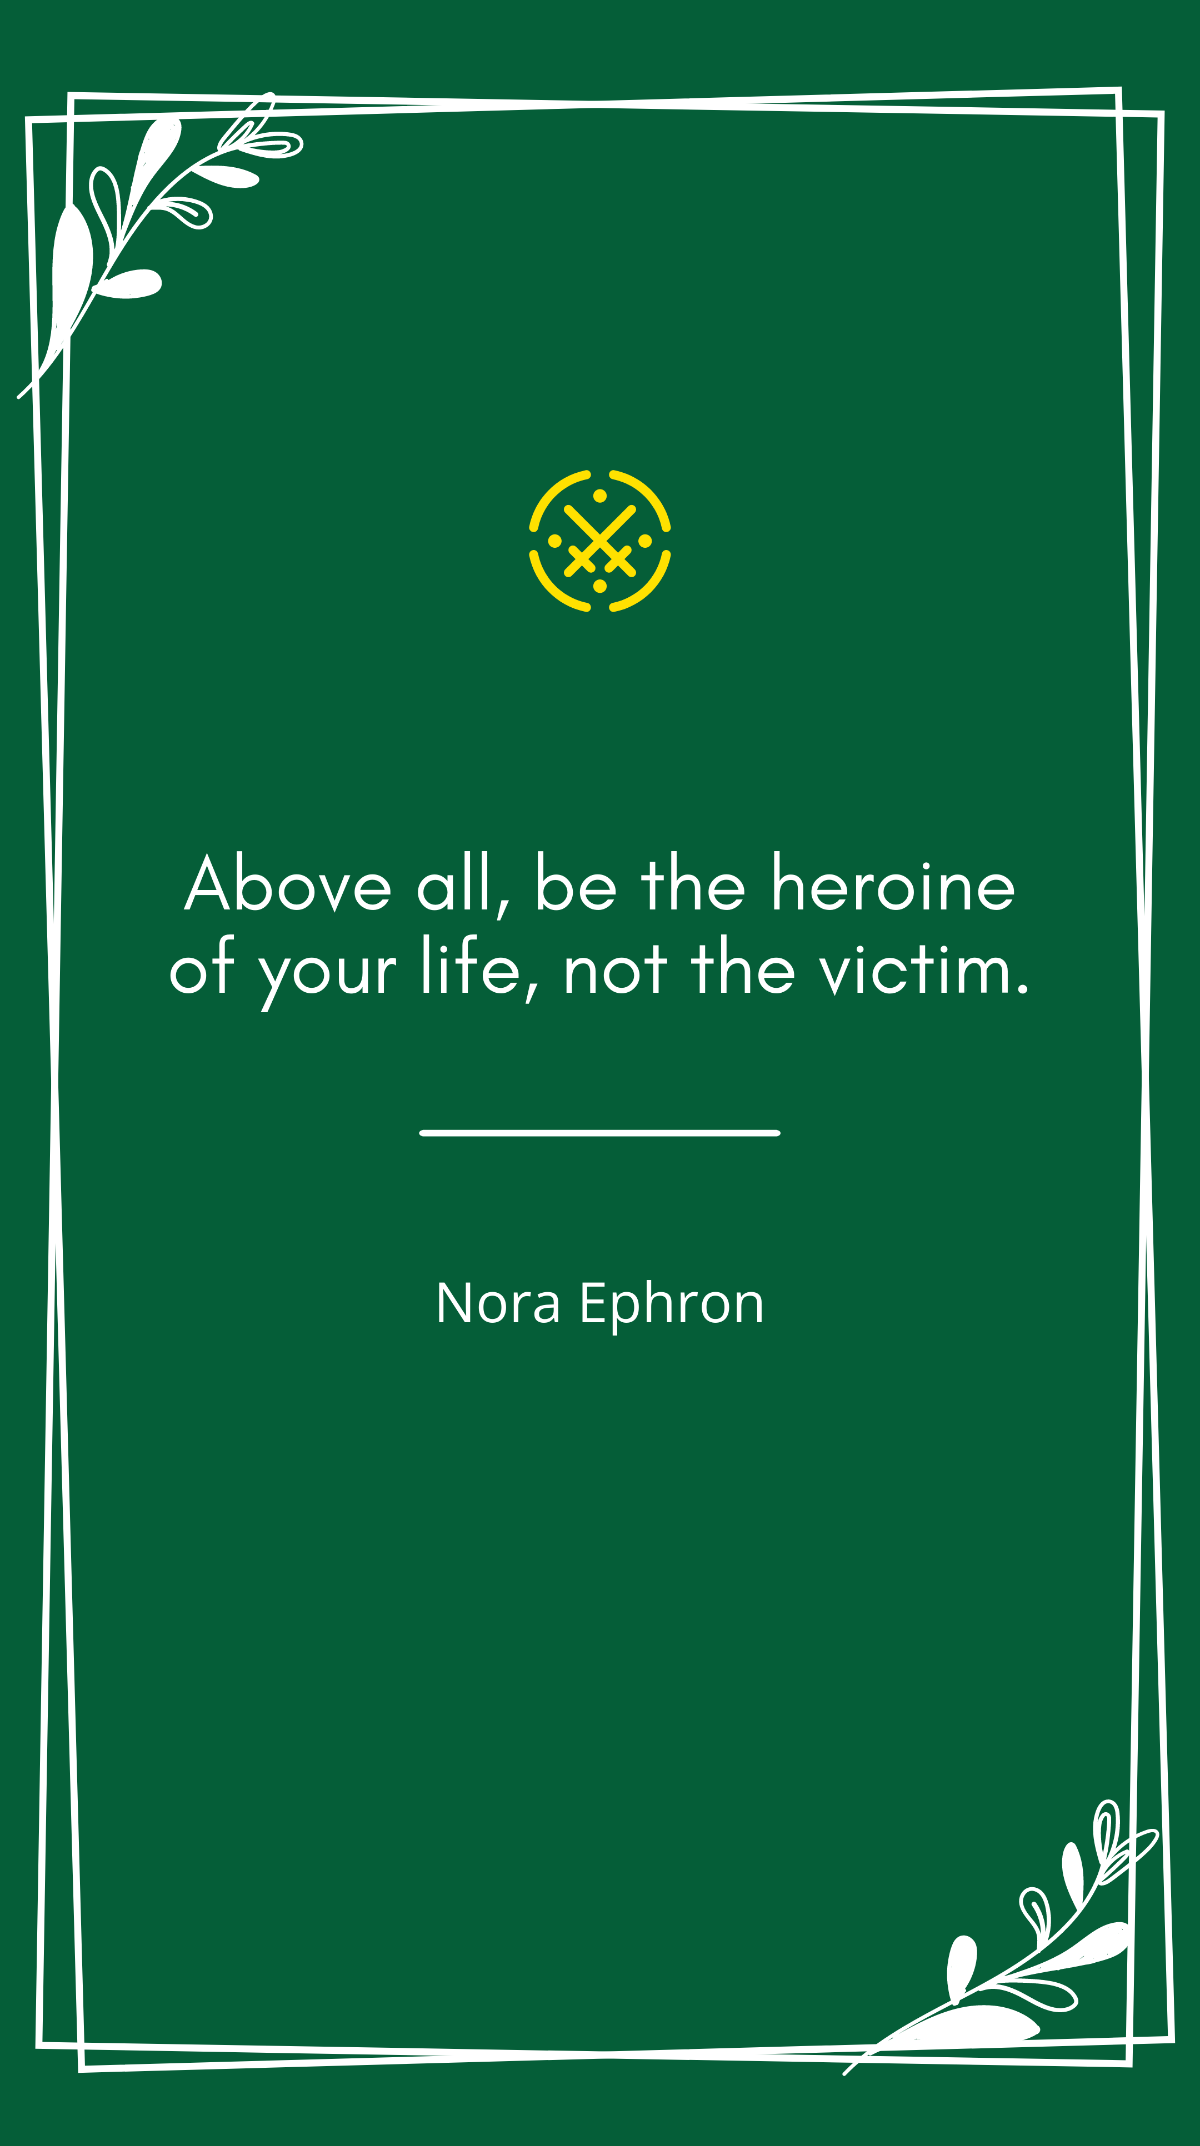 Nora Ephron - “Above all, be the heroine of your life, not the victim.” Template